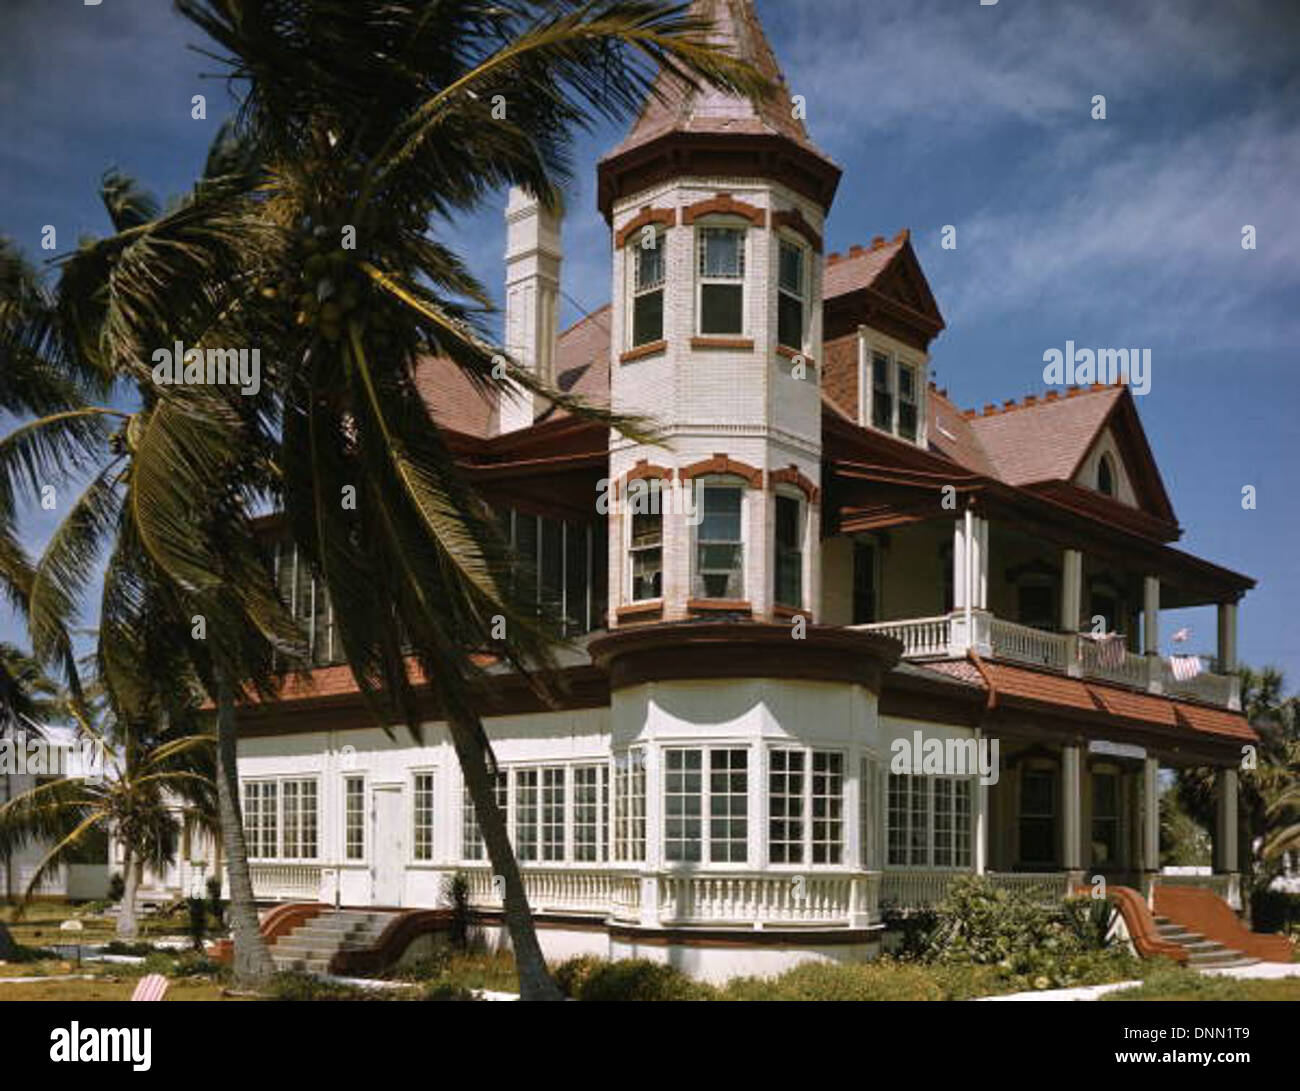 'Southernmost House' located at 1400 Duval Street in Key West, Florida Stock Photo